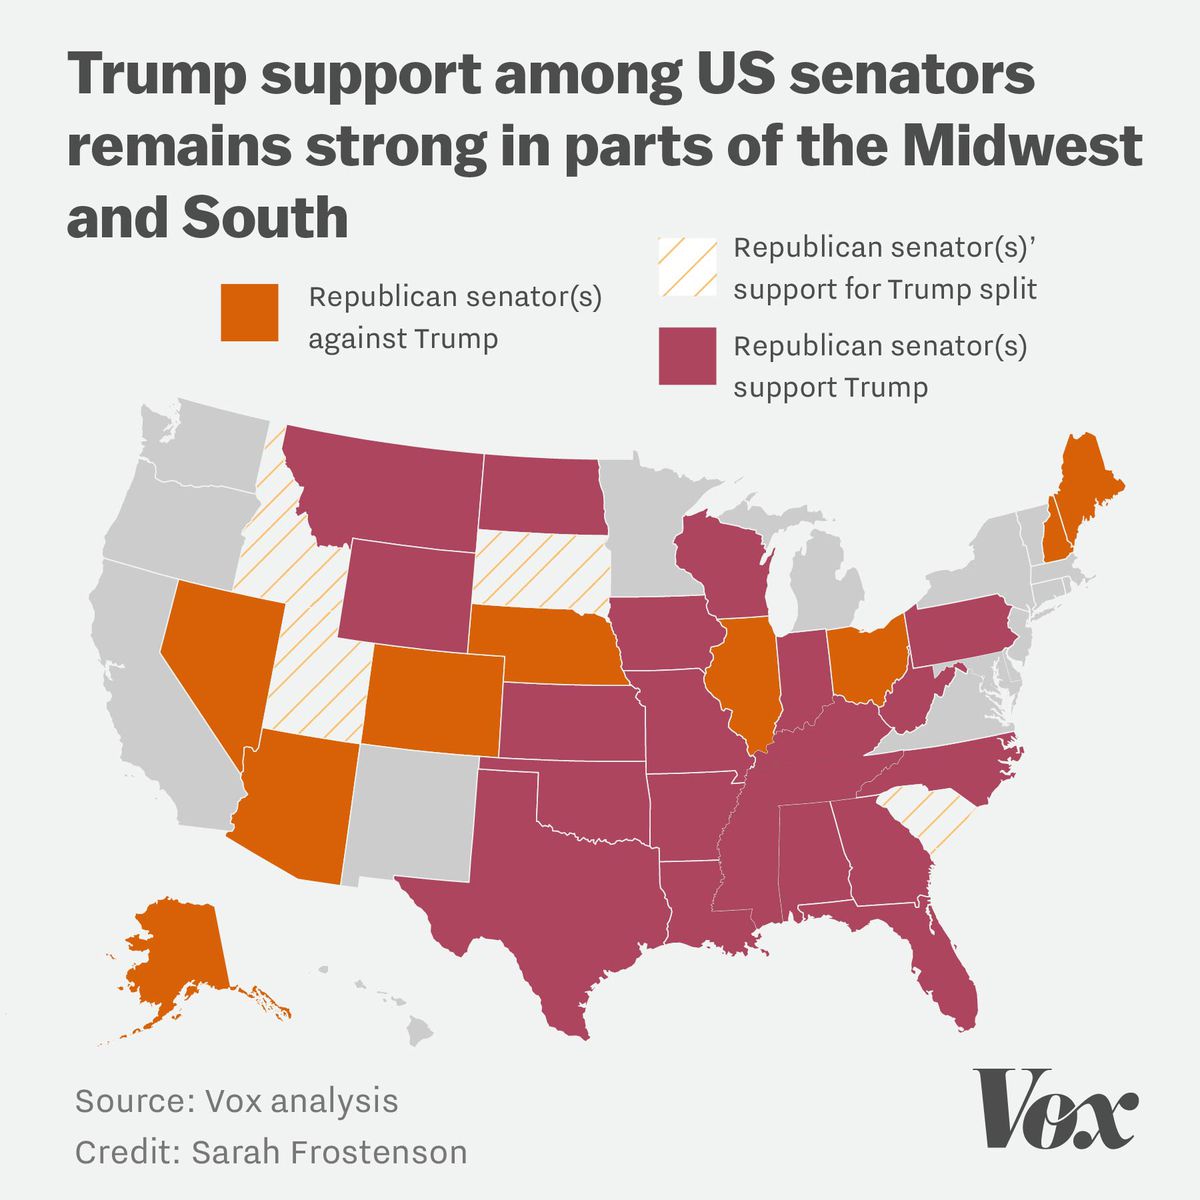 Map showing Republican senator support for Trump and which states are split are anti-Trump